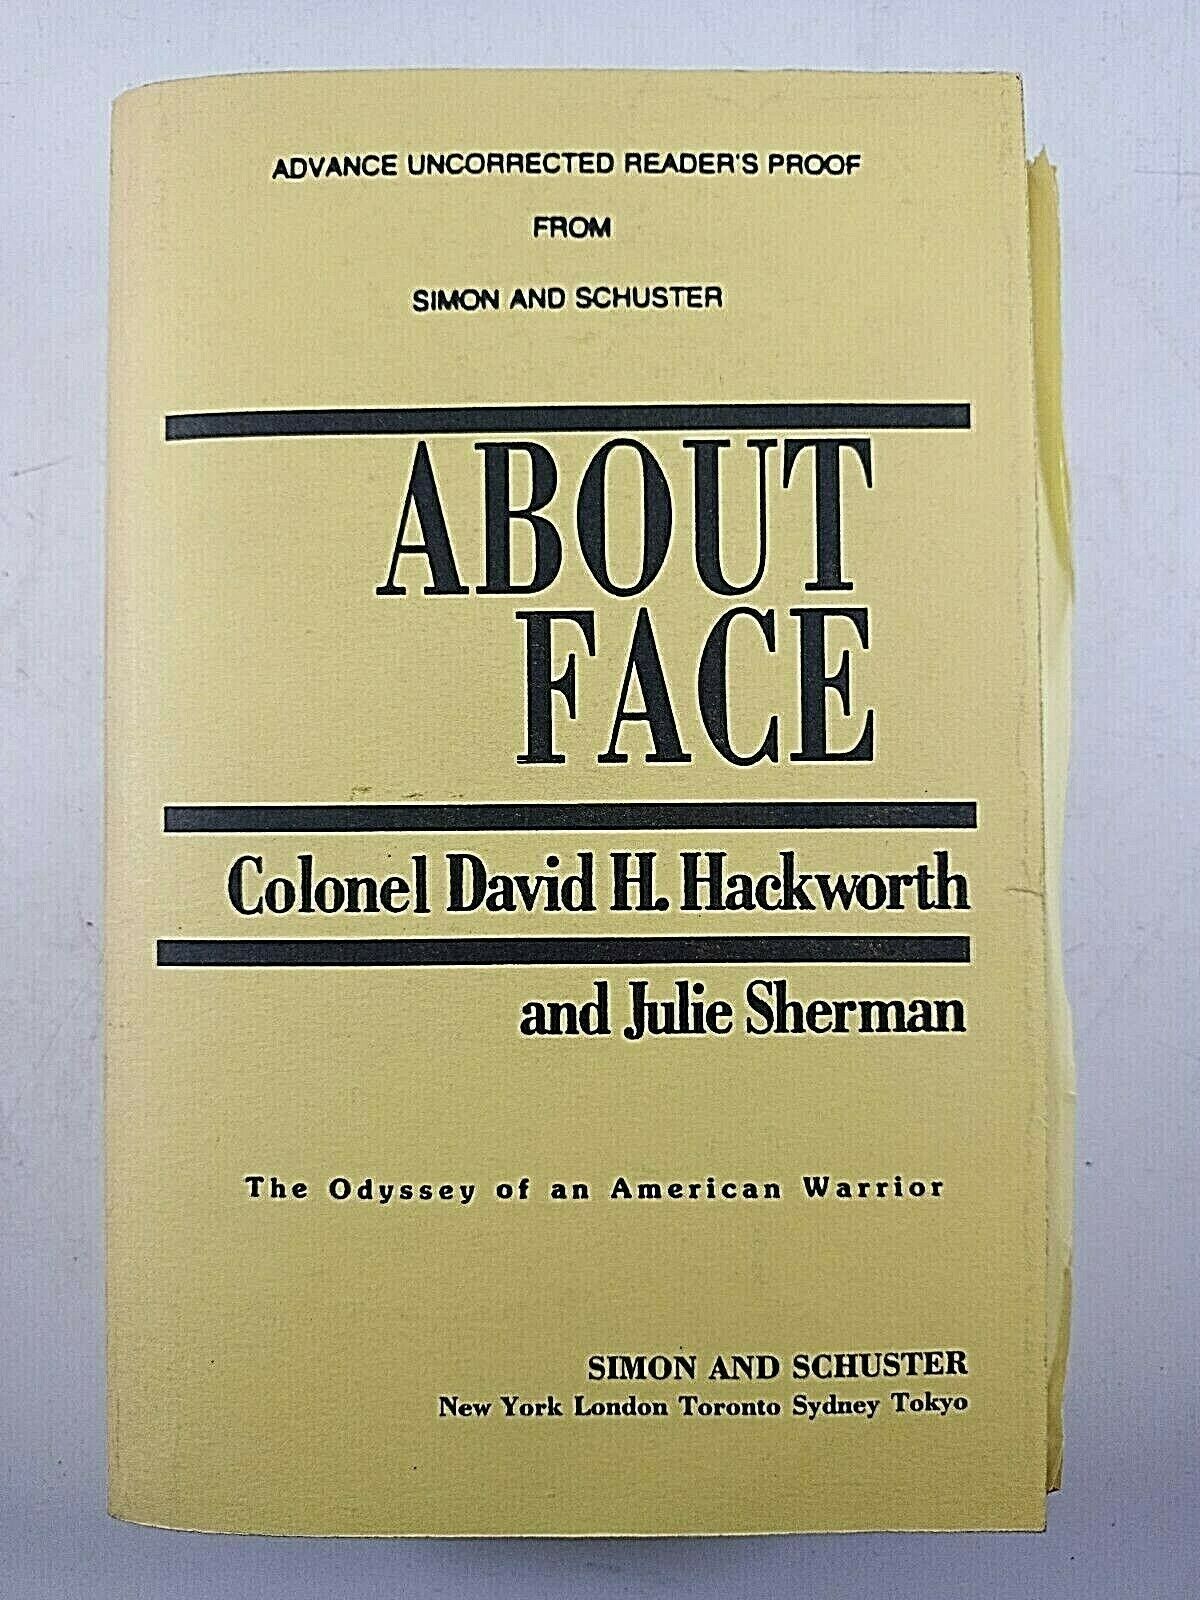 US Vietnam About Face Advance Uncorrected Readers Proof Reference Book